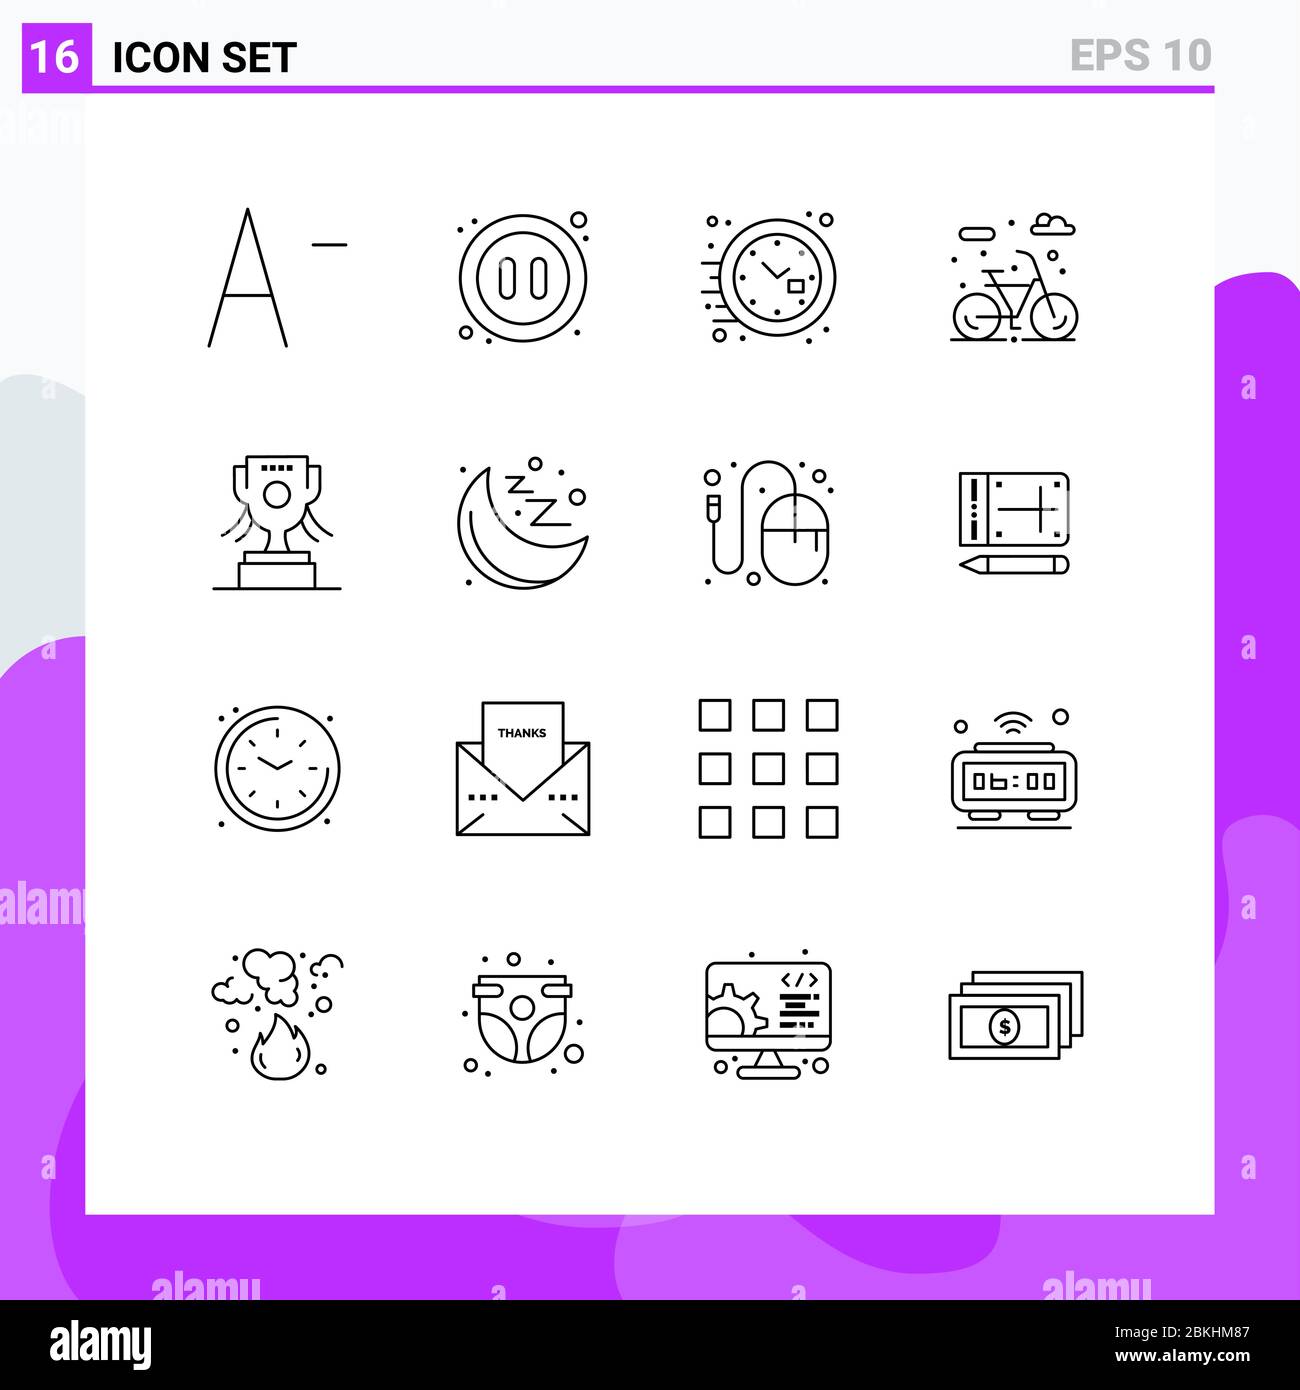 Mobile Interface Outline Set of 16 Pictograms of health, ireland, time, cup, lifecycle Editable Vector Design Elements Stock Vector